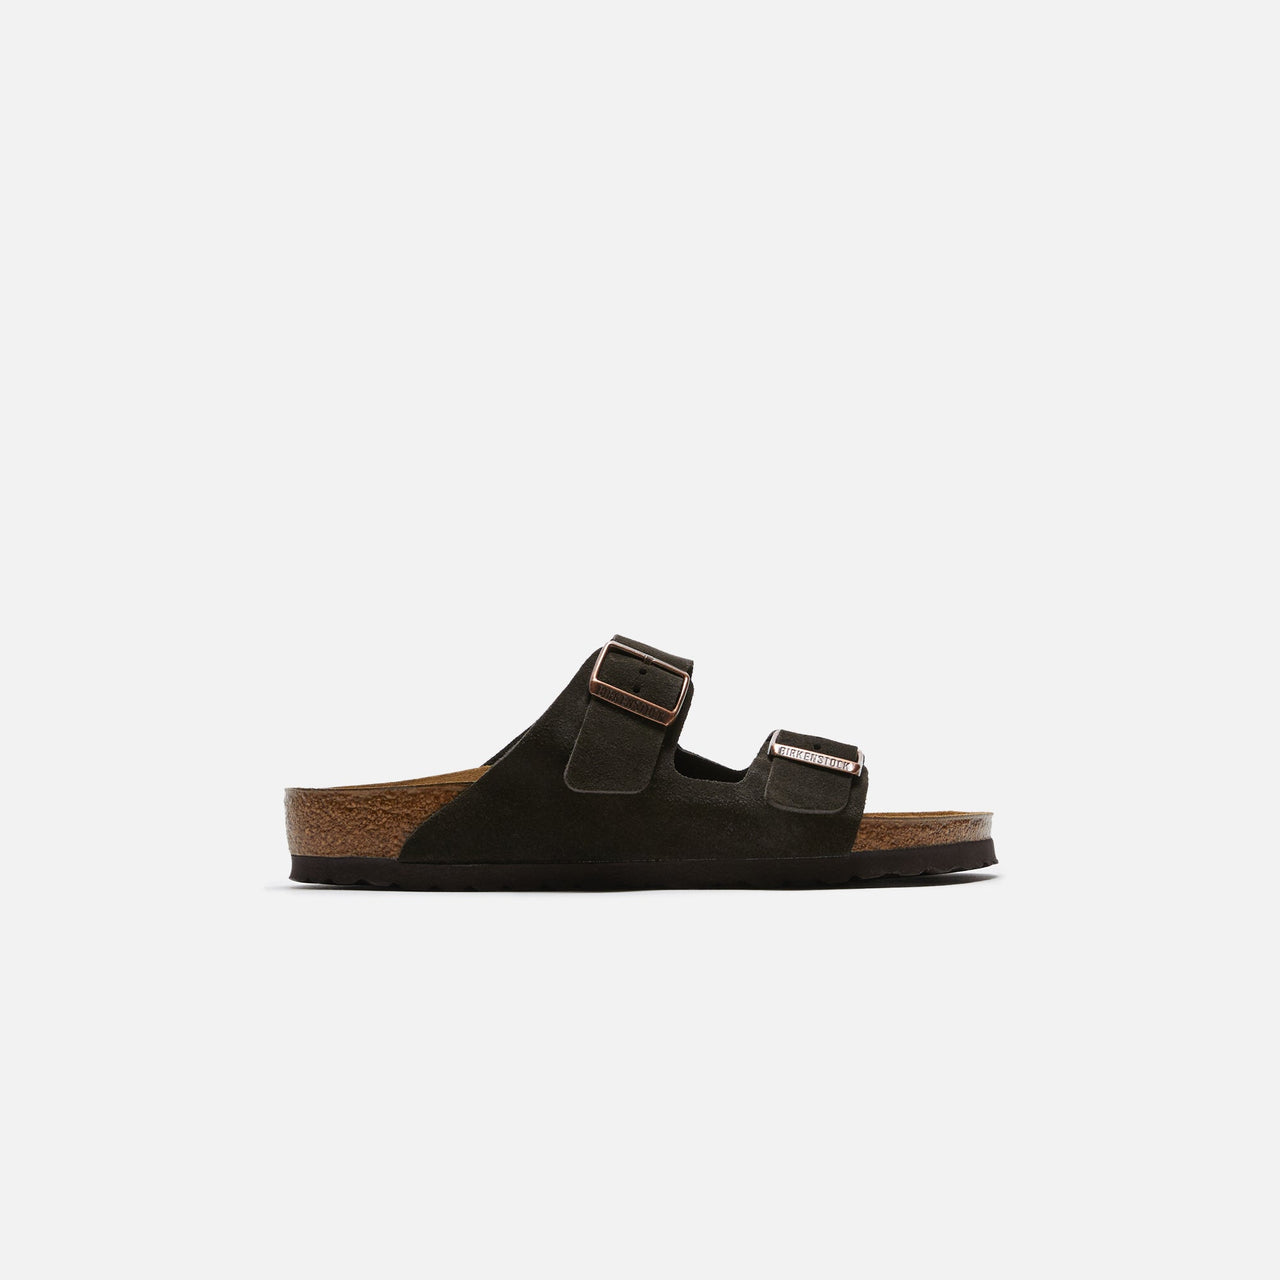 Birkenstock Arizona Suede Mocha sandal with two adjustable straps and soft footbed 